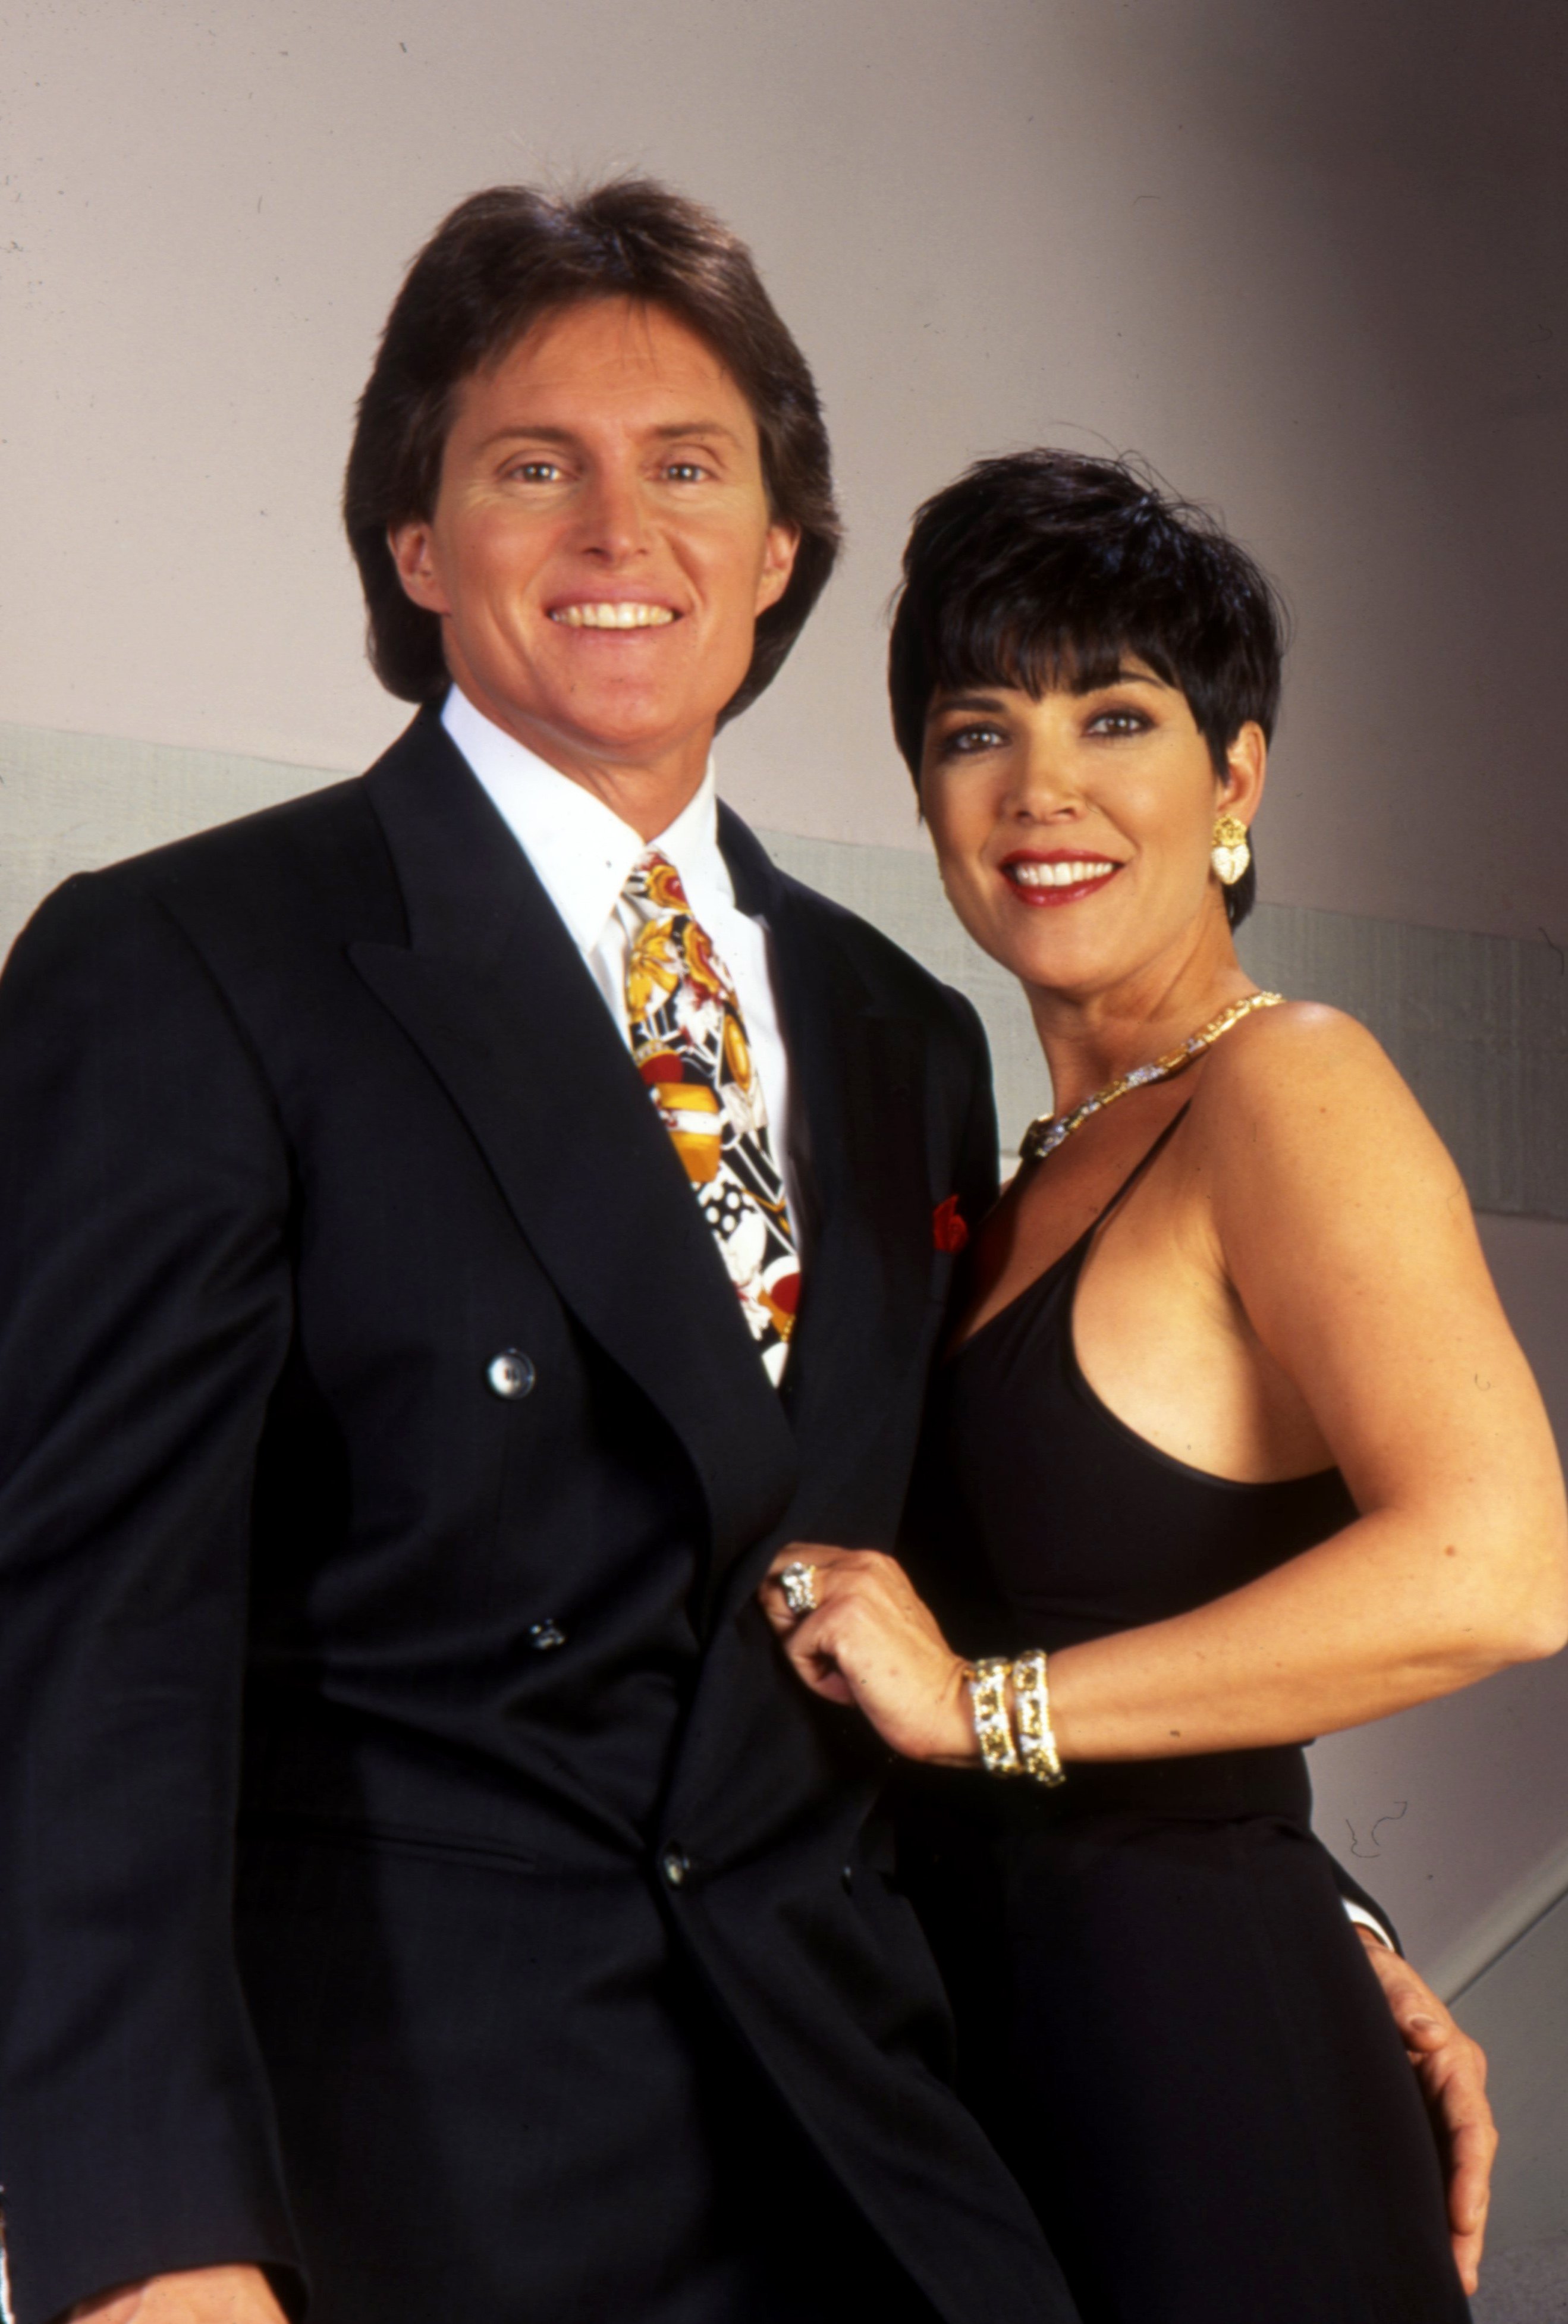 Bruce Jenner and Kris Jenner pose for a portrait on January 1, 1991 in Los Angeles, California. | Source: Getty Images